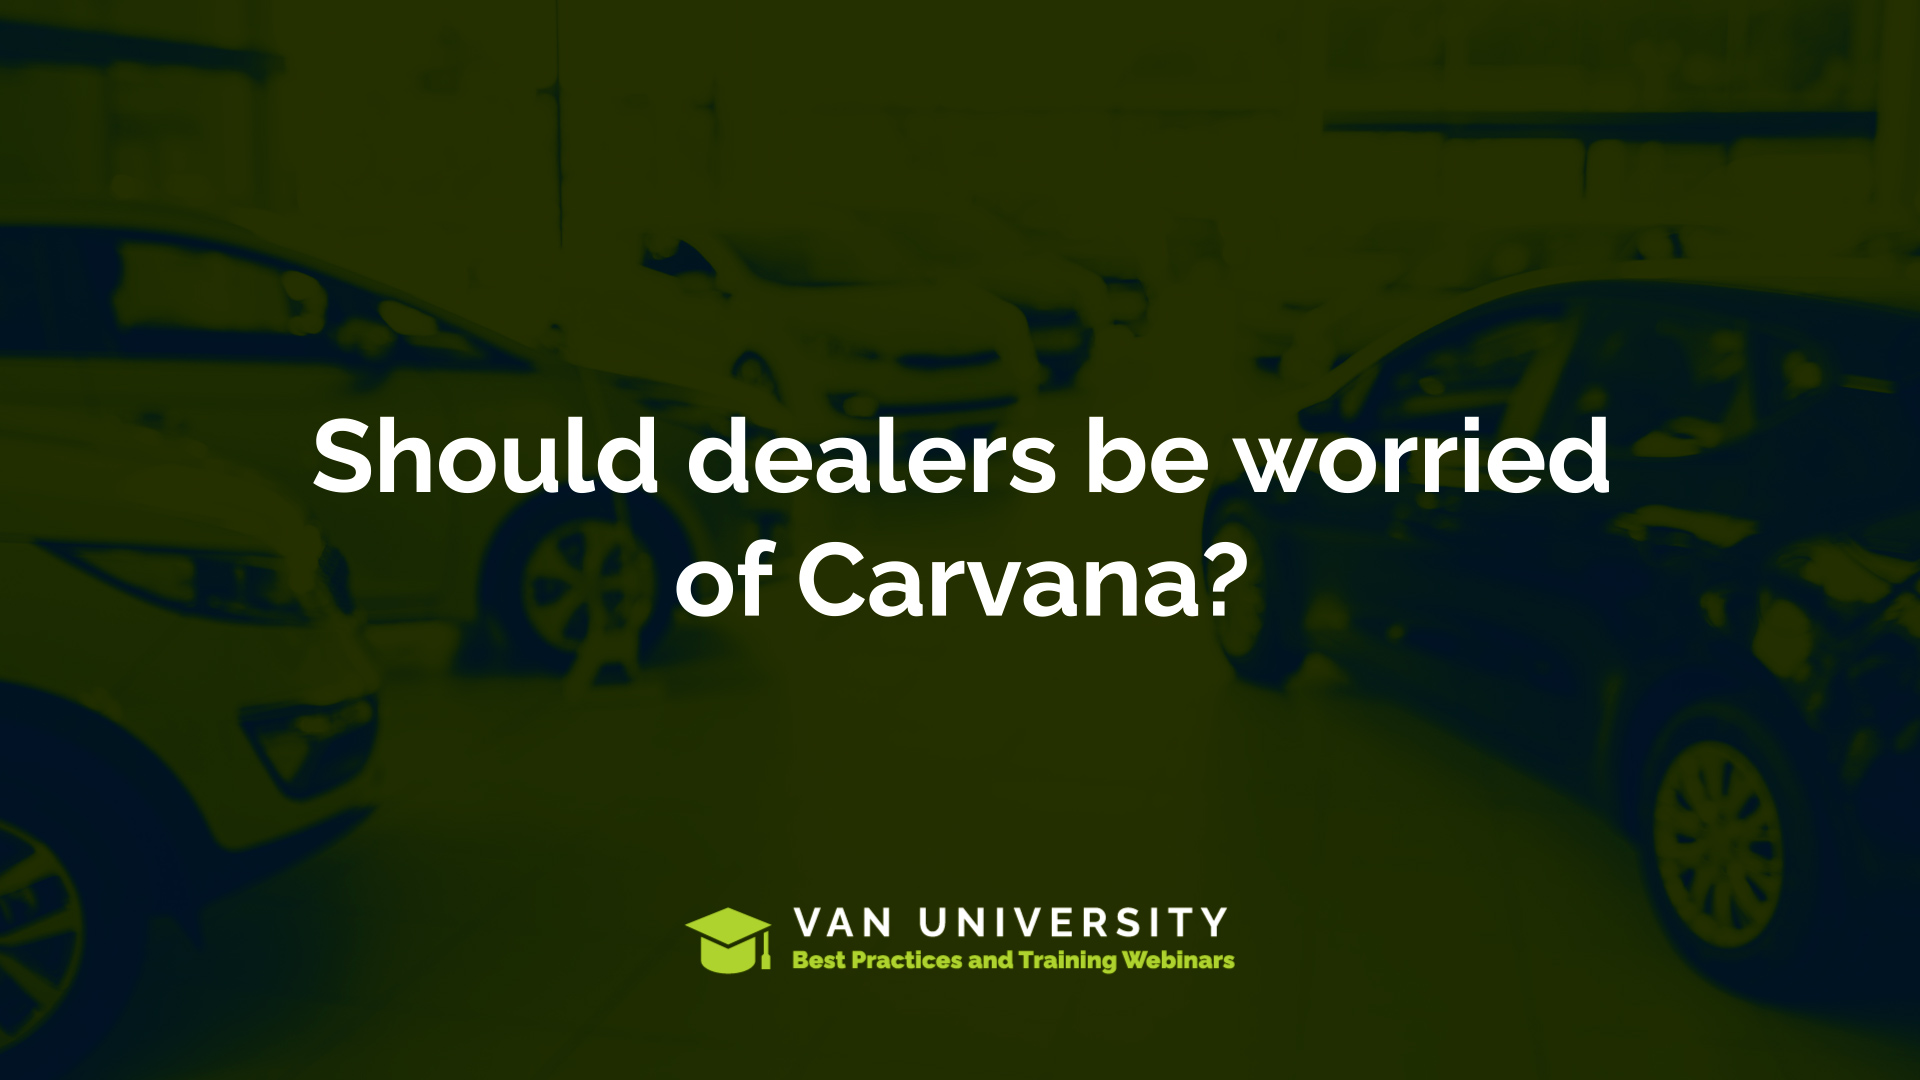 Should dealers be worried about Carvana?